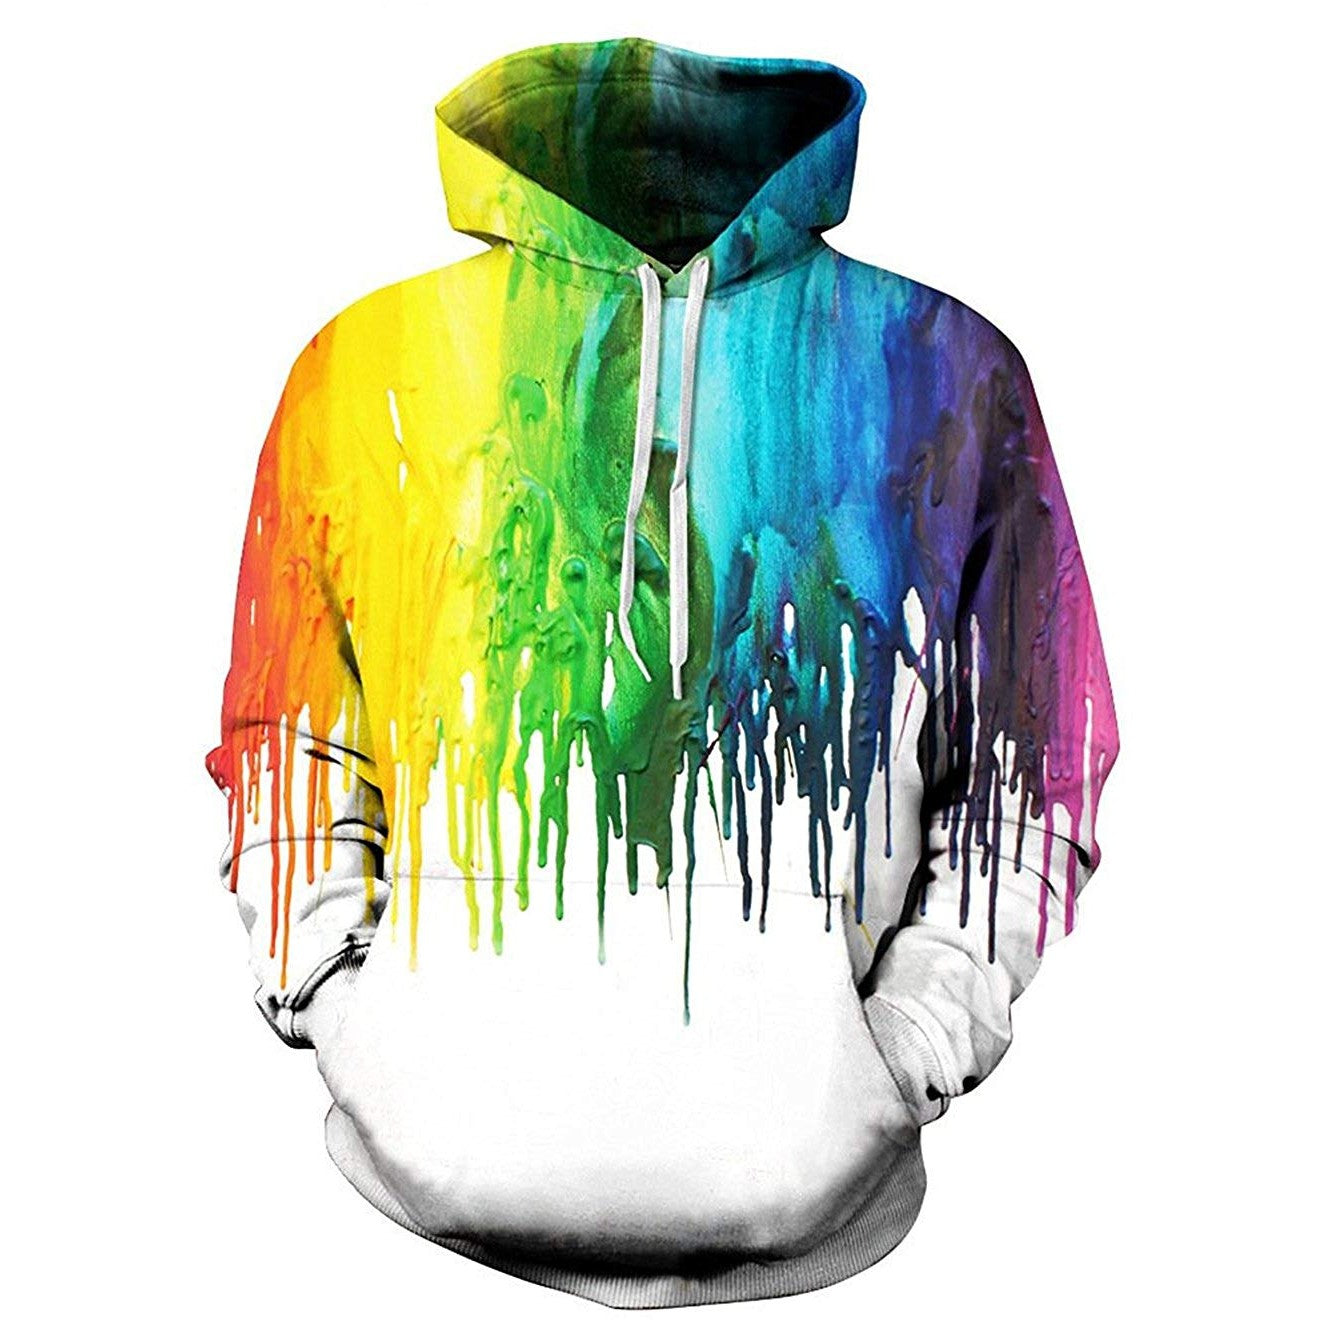 Wet Paint Graphic Hoodie - oddgifts.com